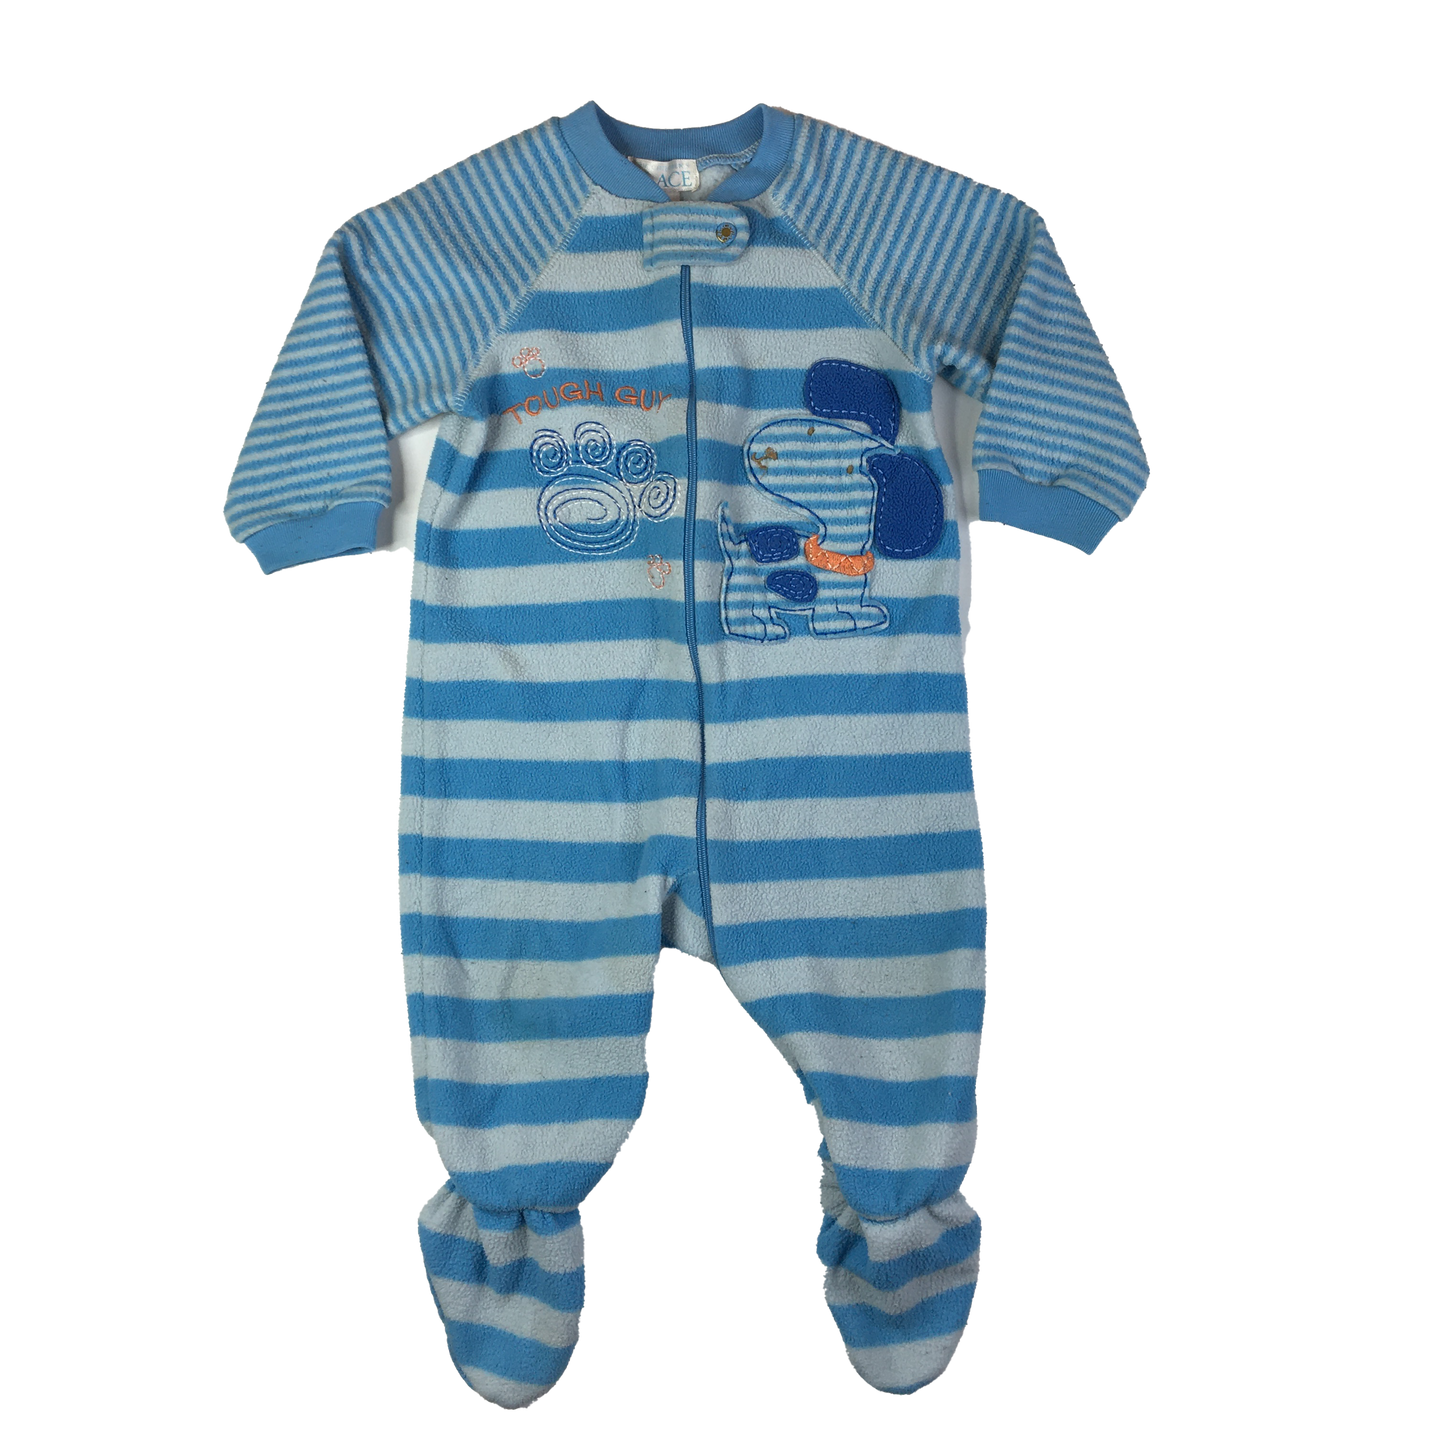 The Children's Place Blue Striped Fleece Footed Sleeper with Dog 12M